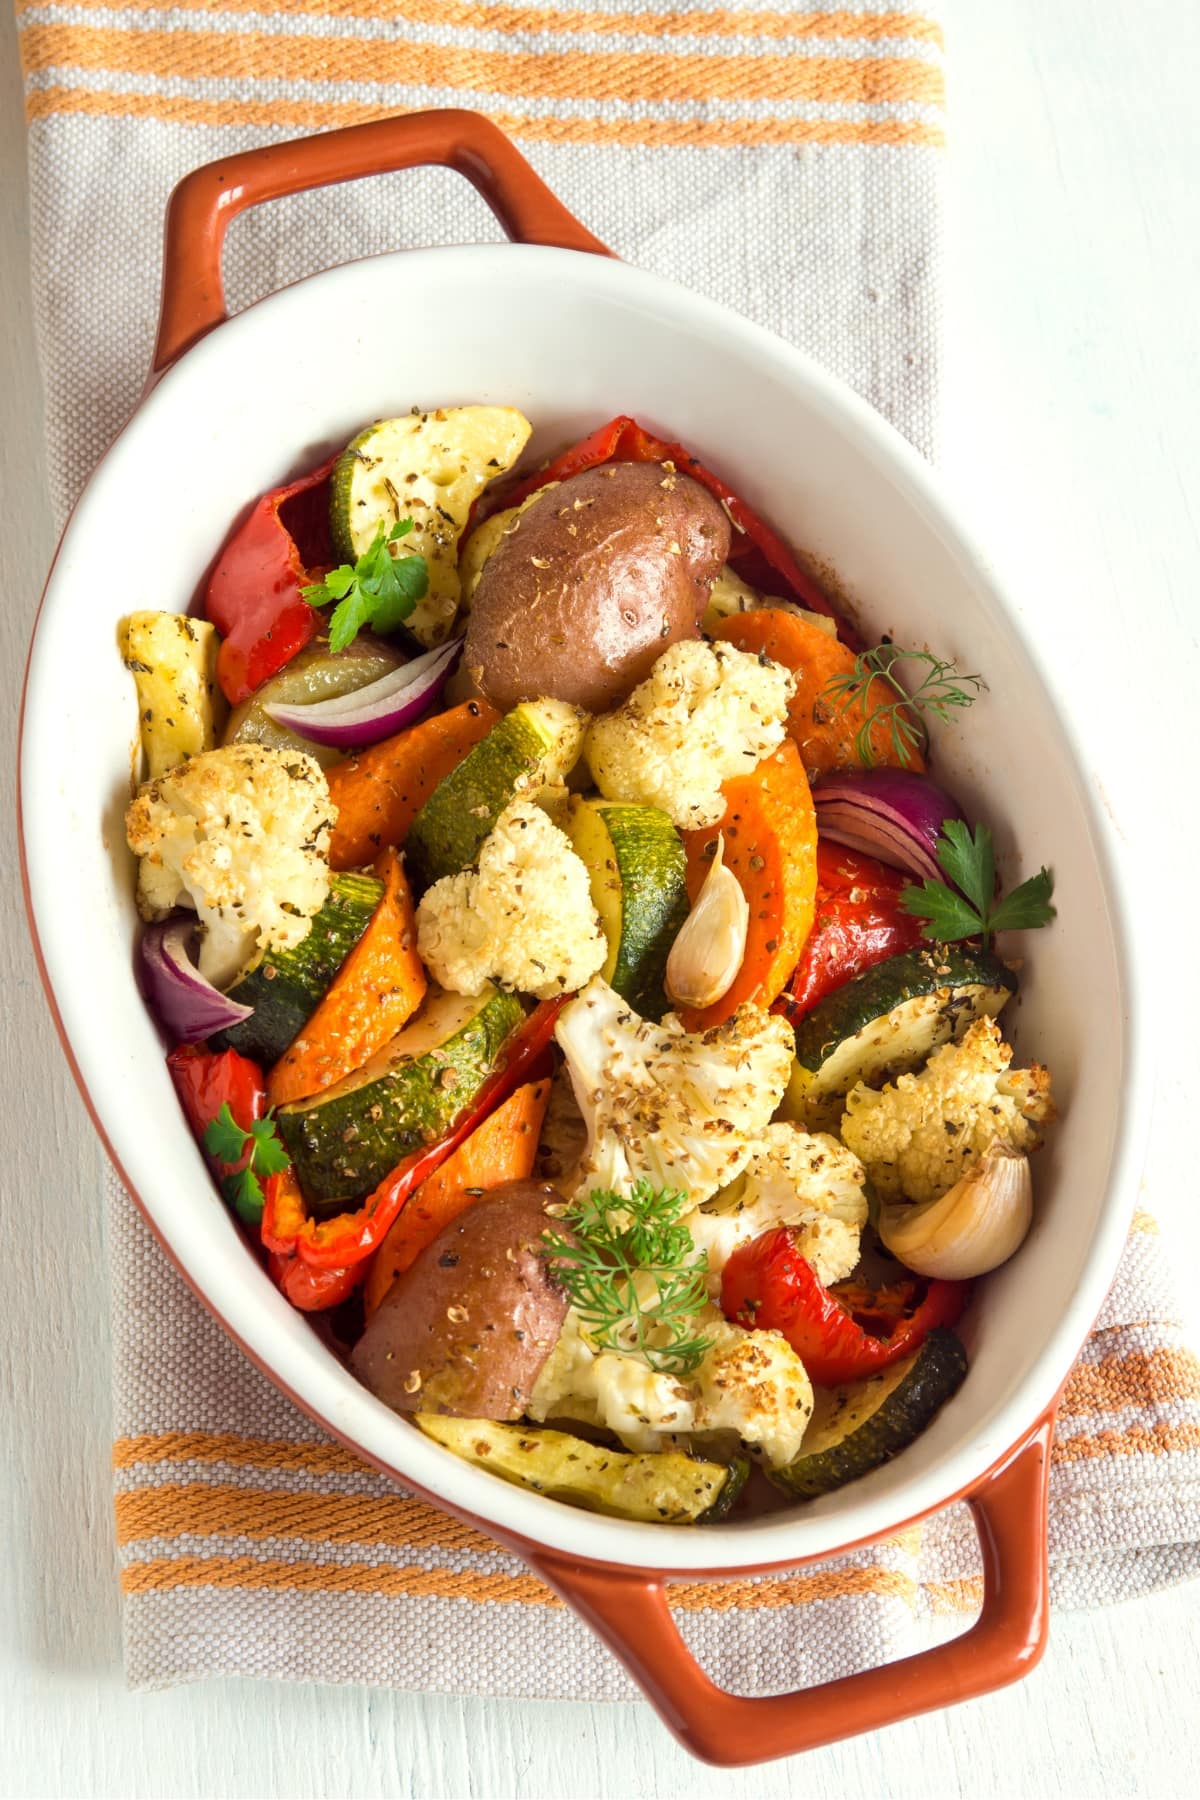 Homemade Roasted Vegetables: Cauliflower, Zucchini, Carrots, Potatoes and Onions